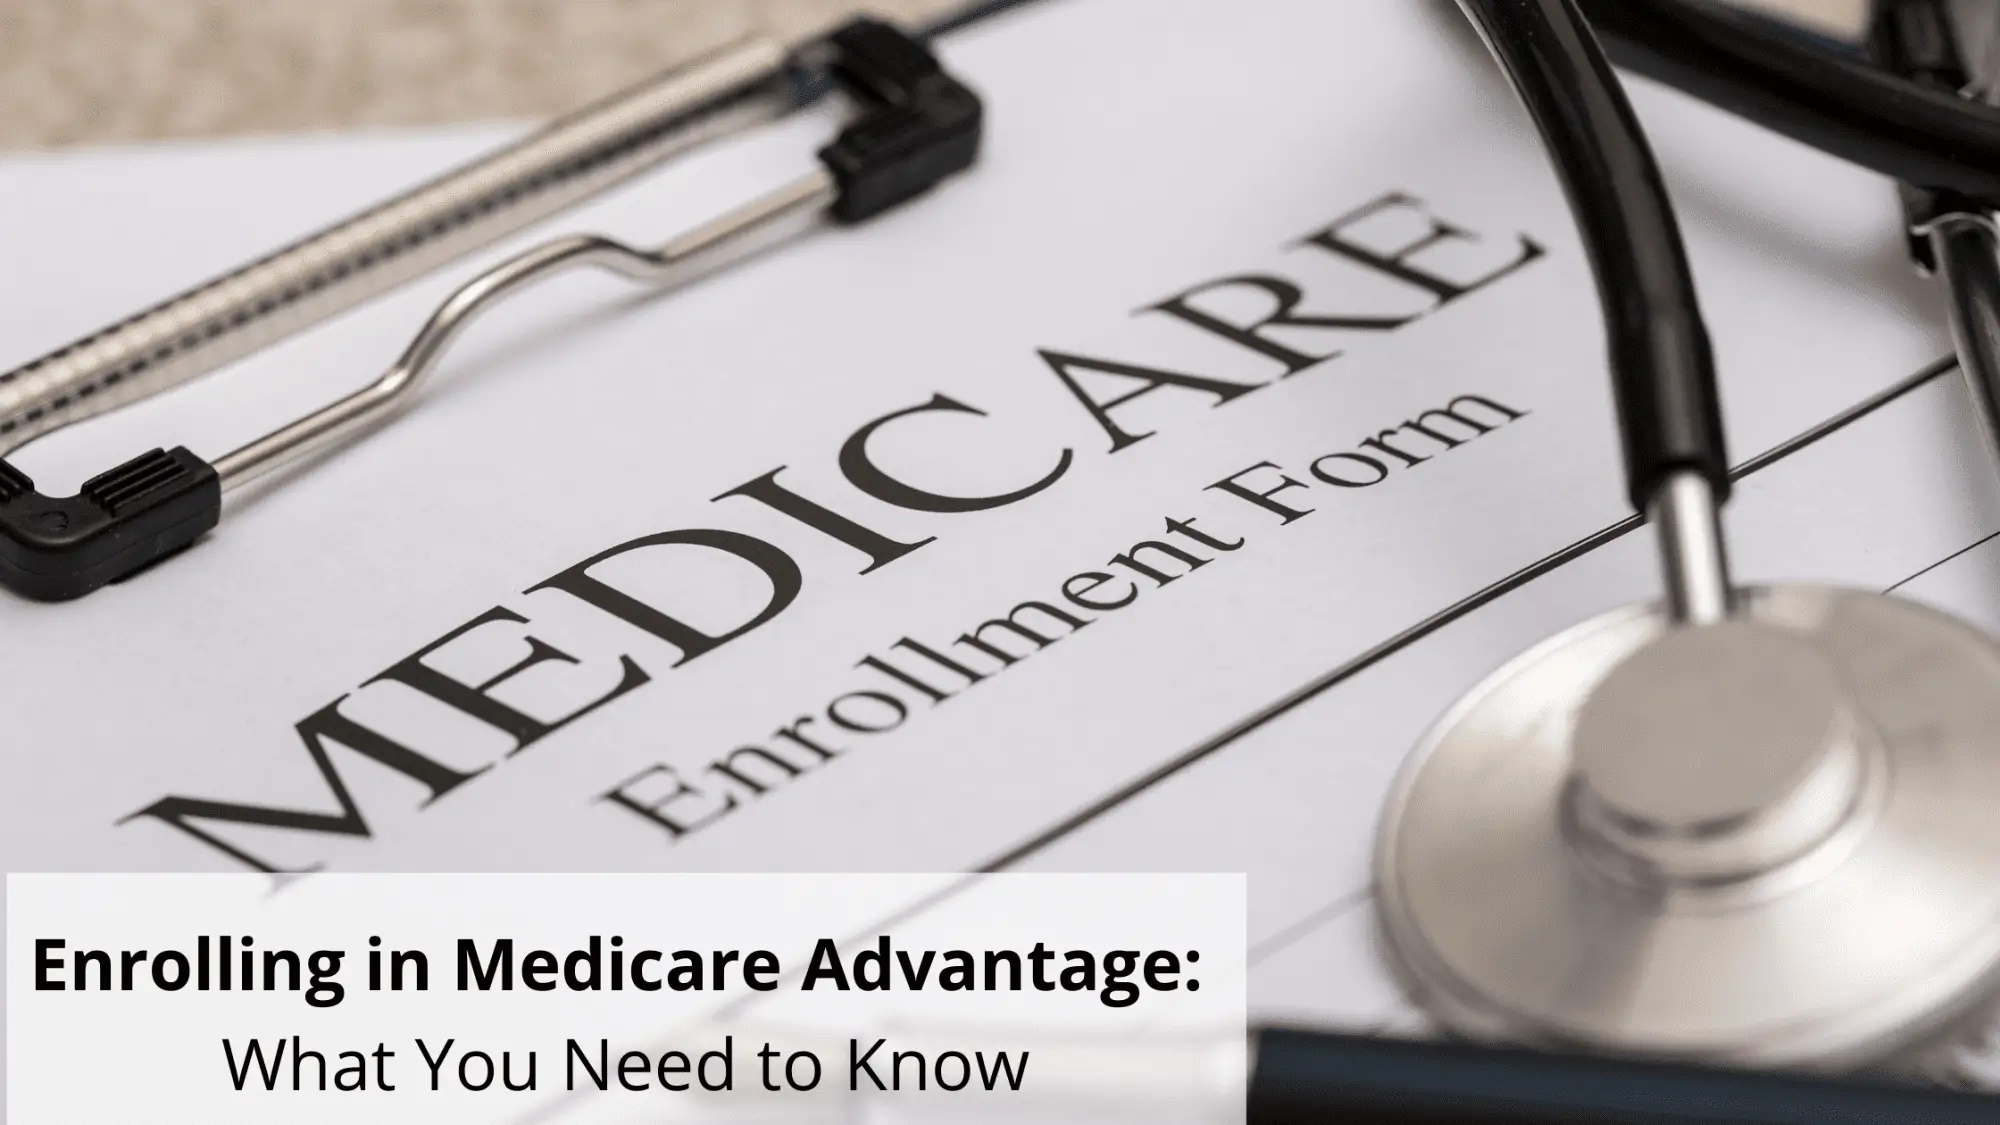 Enrolling in Medicare Advantage: What You Need to Know